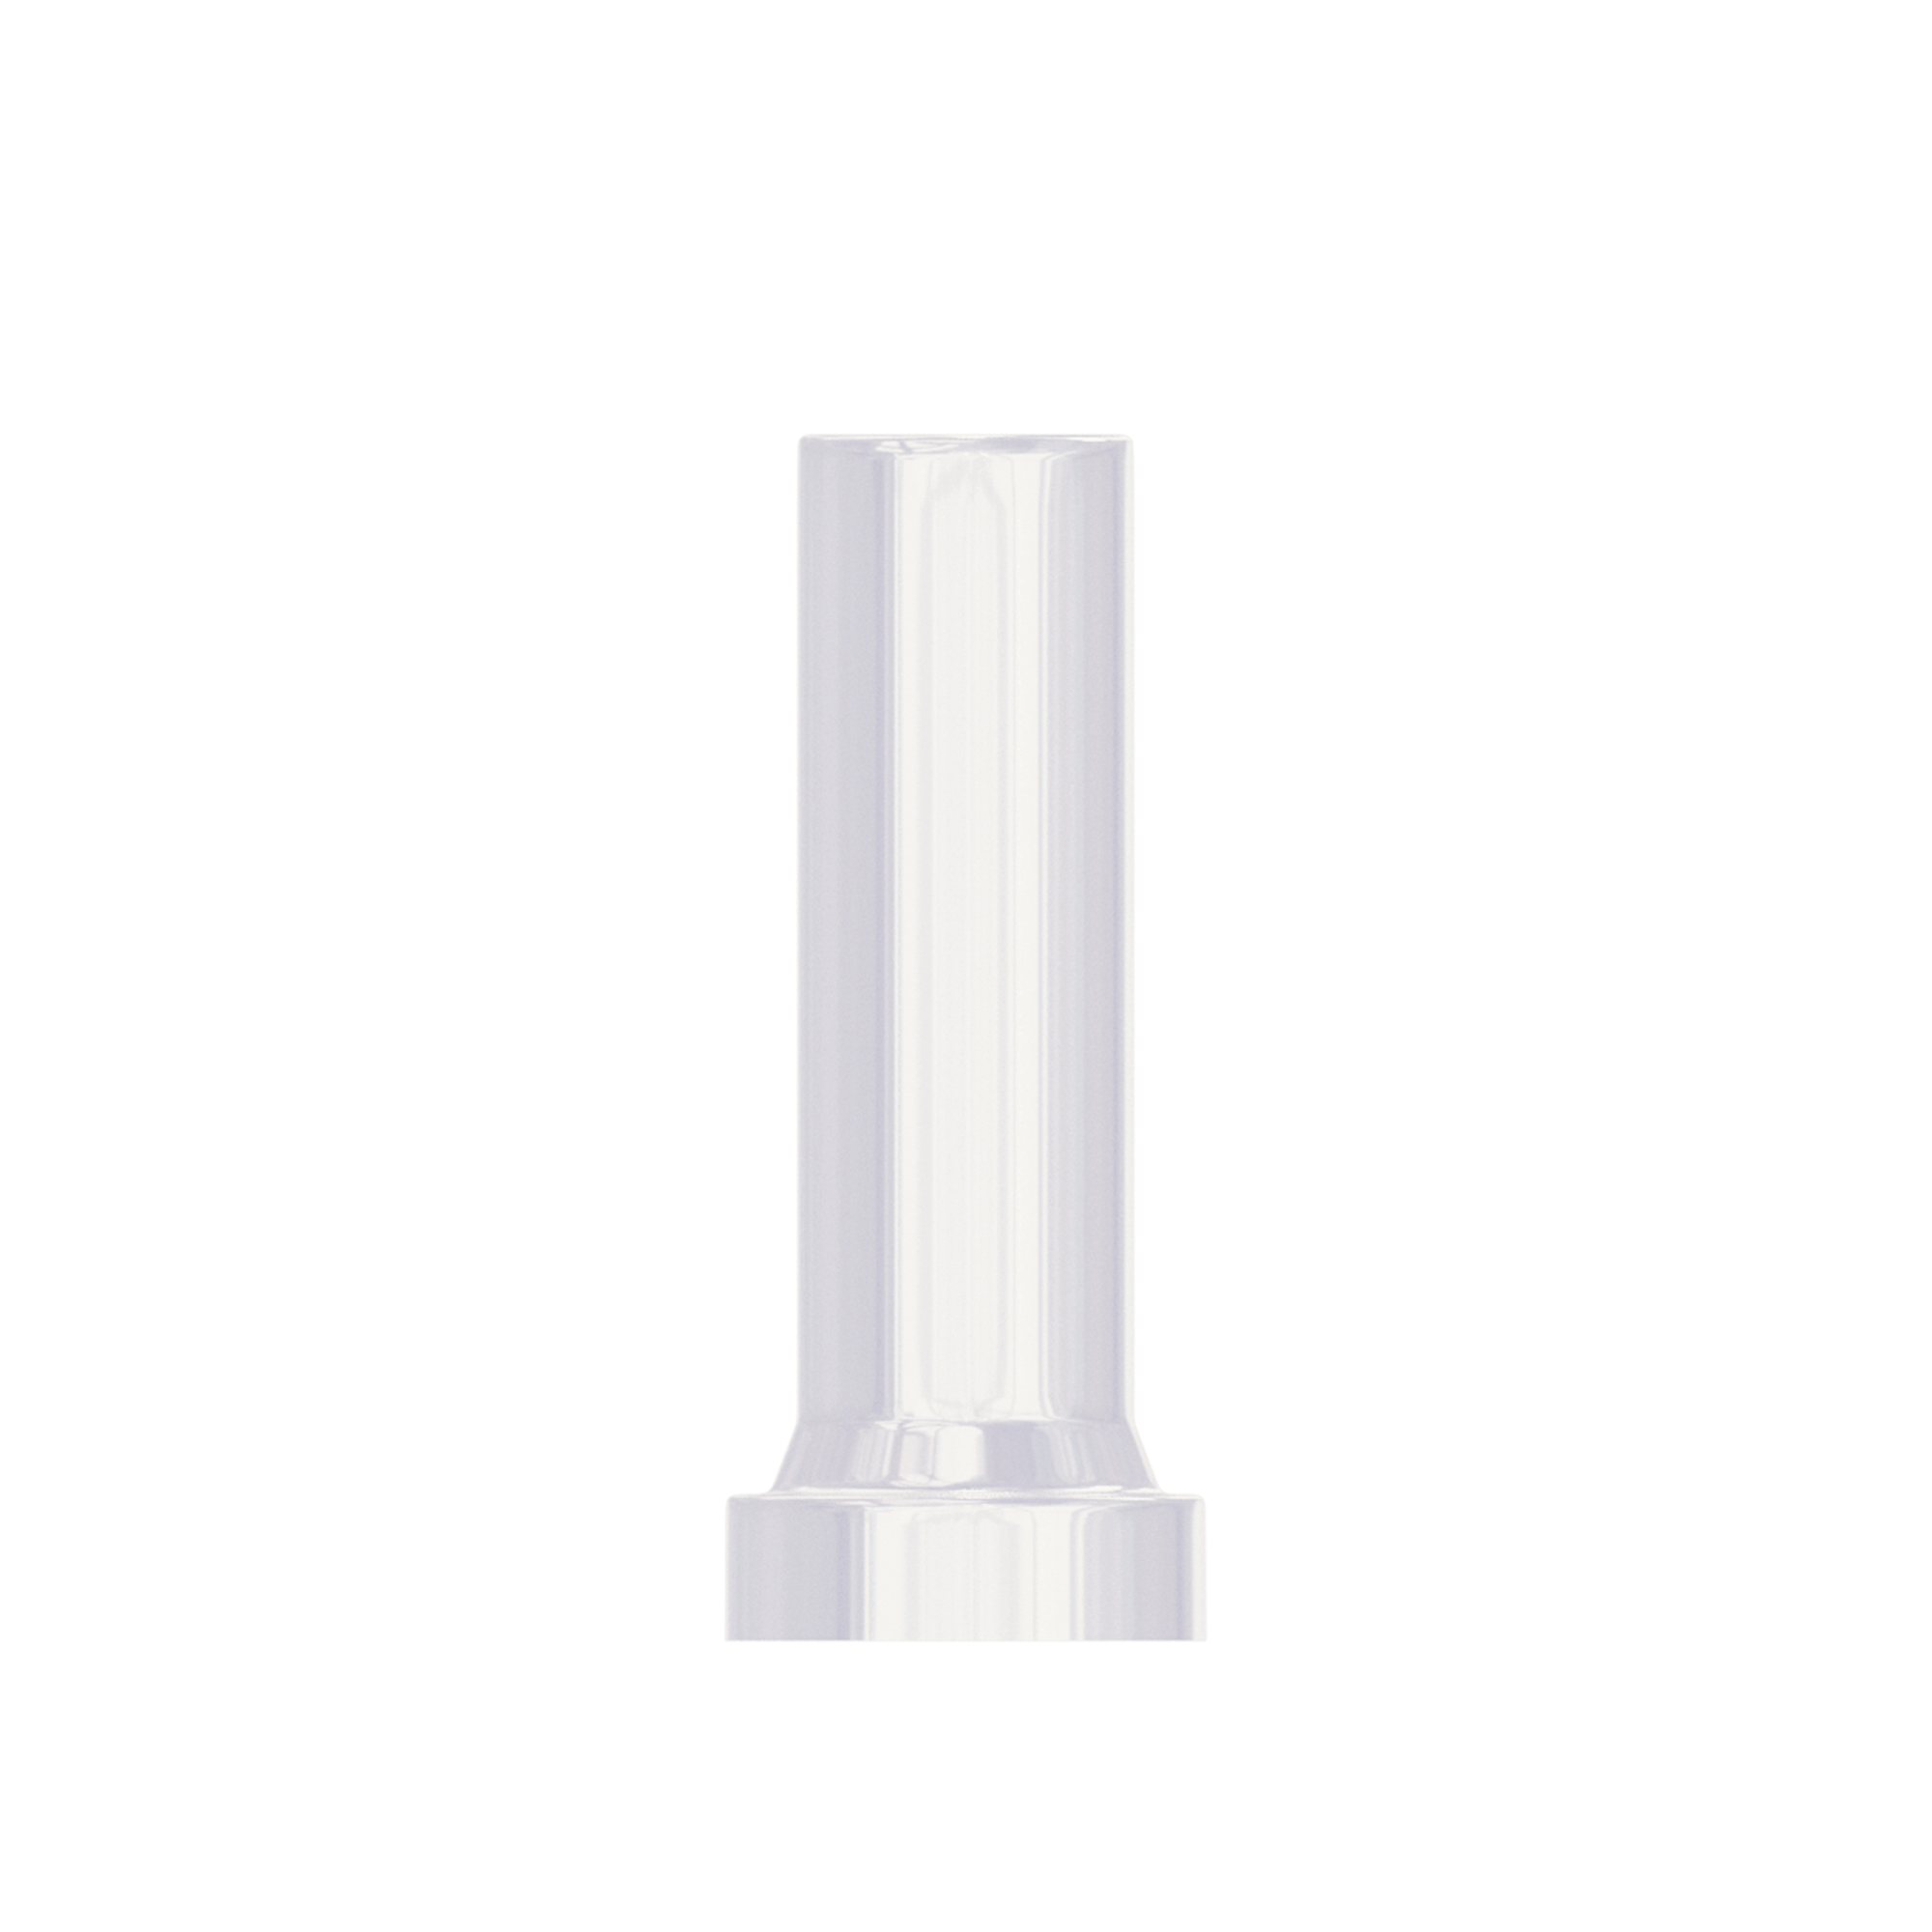 DSI Premium Angulated Multi Unit Abutment (M1.6) 4.8mm Full Set - Conical Connection NP Ø3.5mm